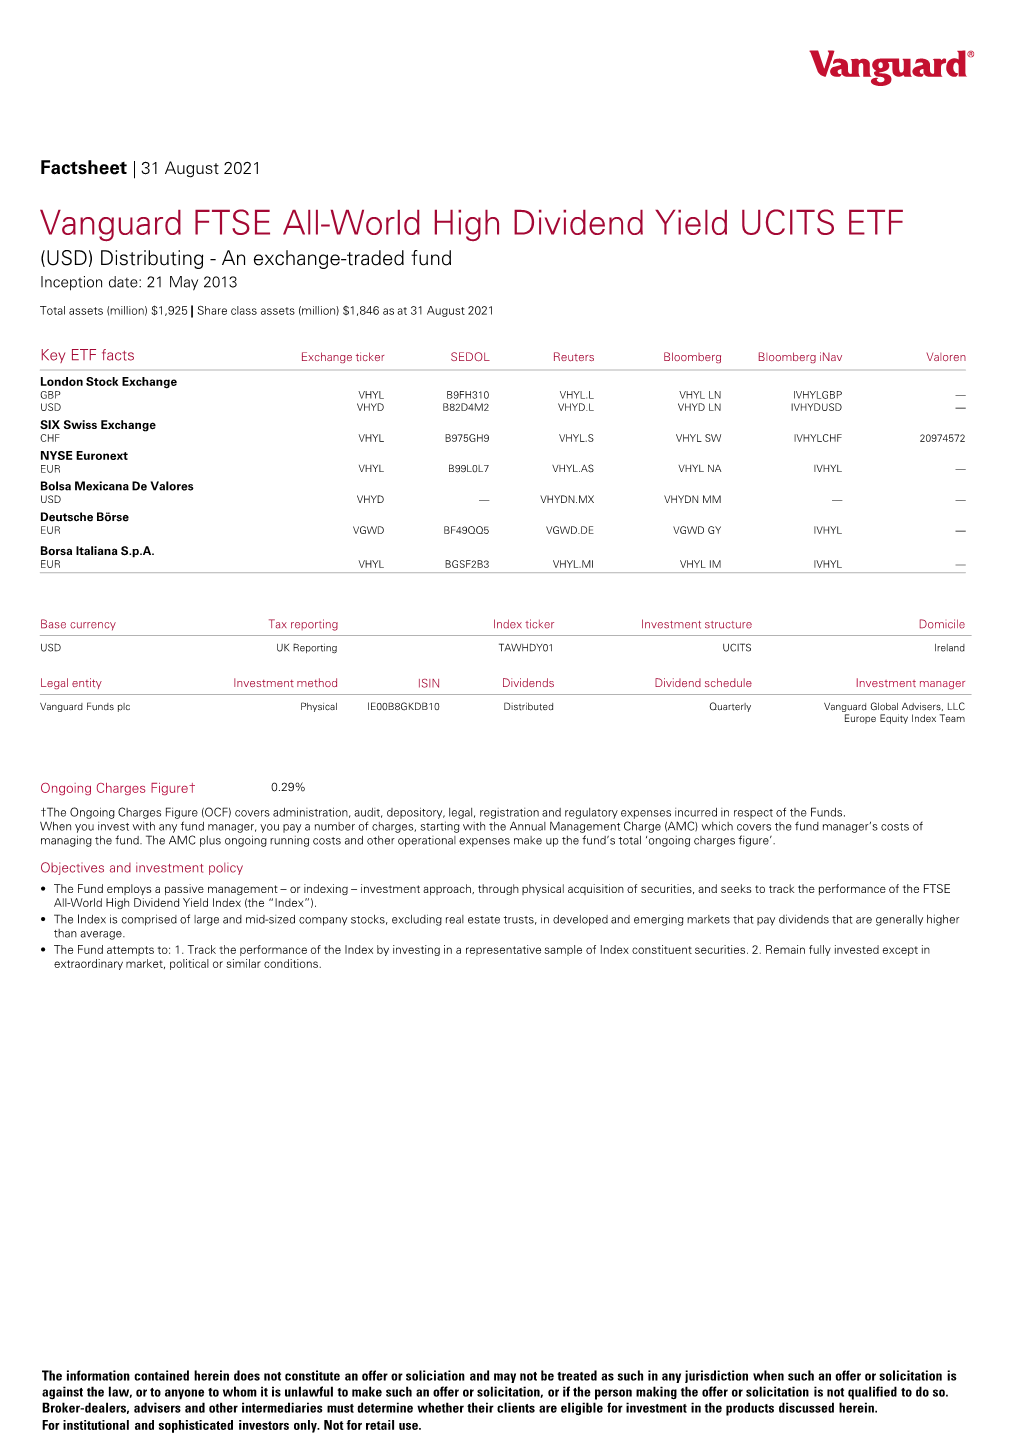 FTSE All-World High Dividend Yield UCITS ETF (USD) Distributing - an Exchange-Traded Fund Inception Date: 21 May 2013